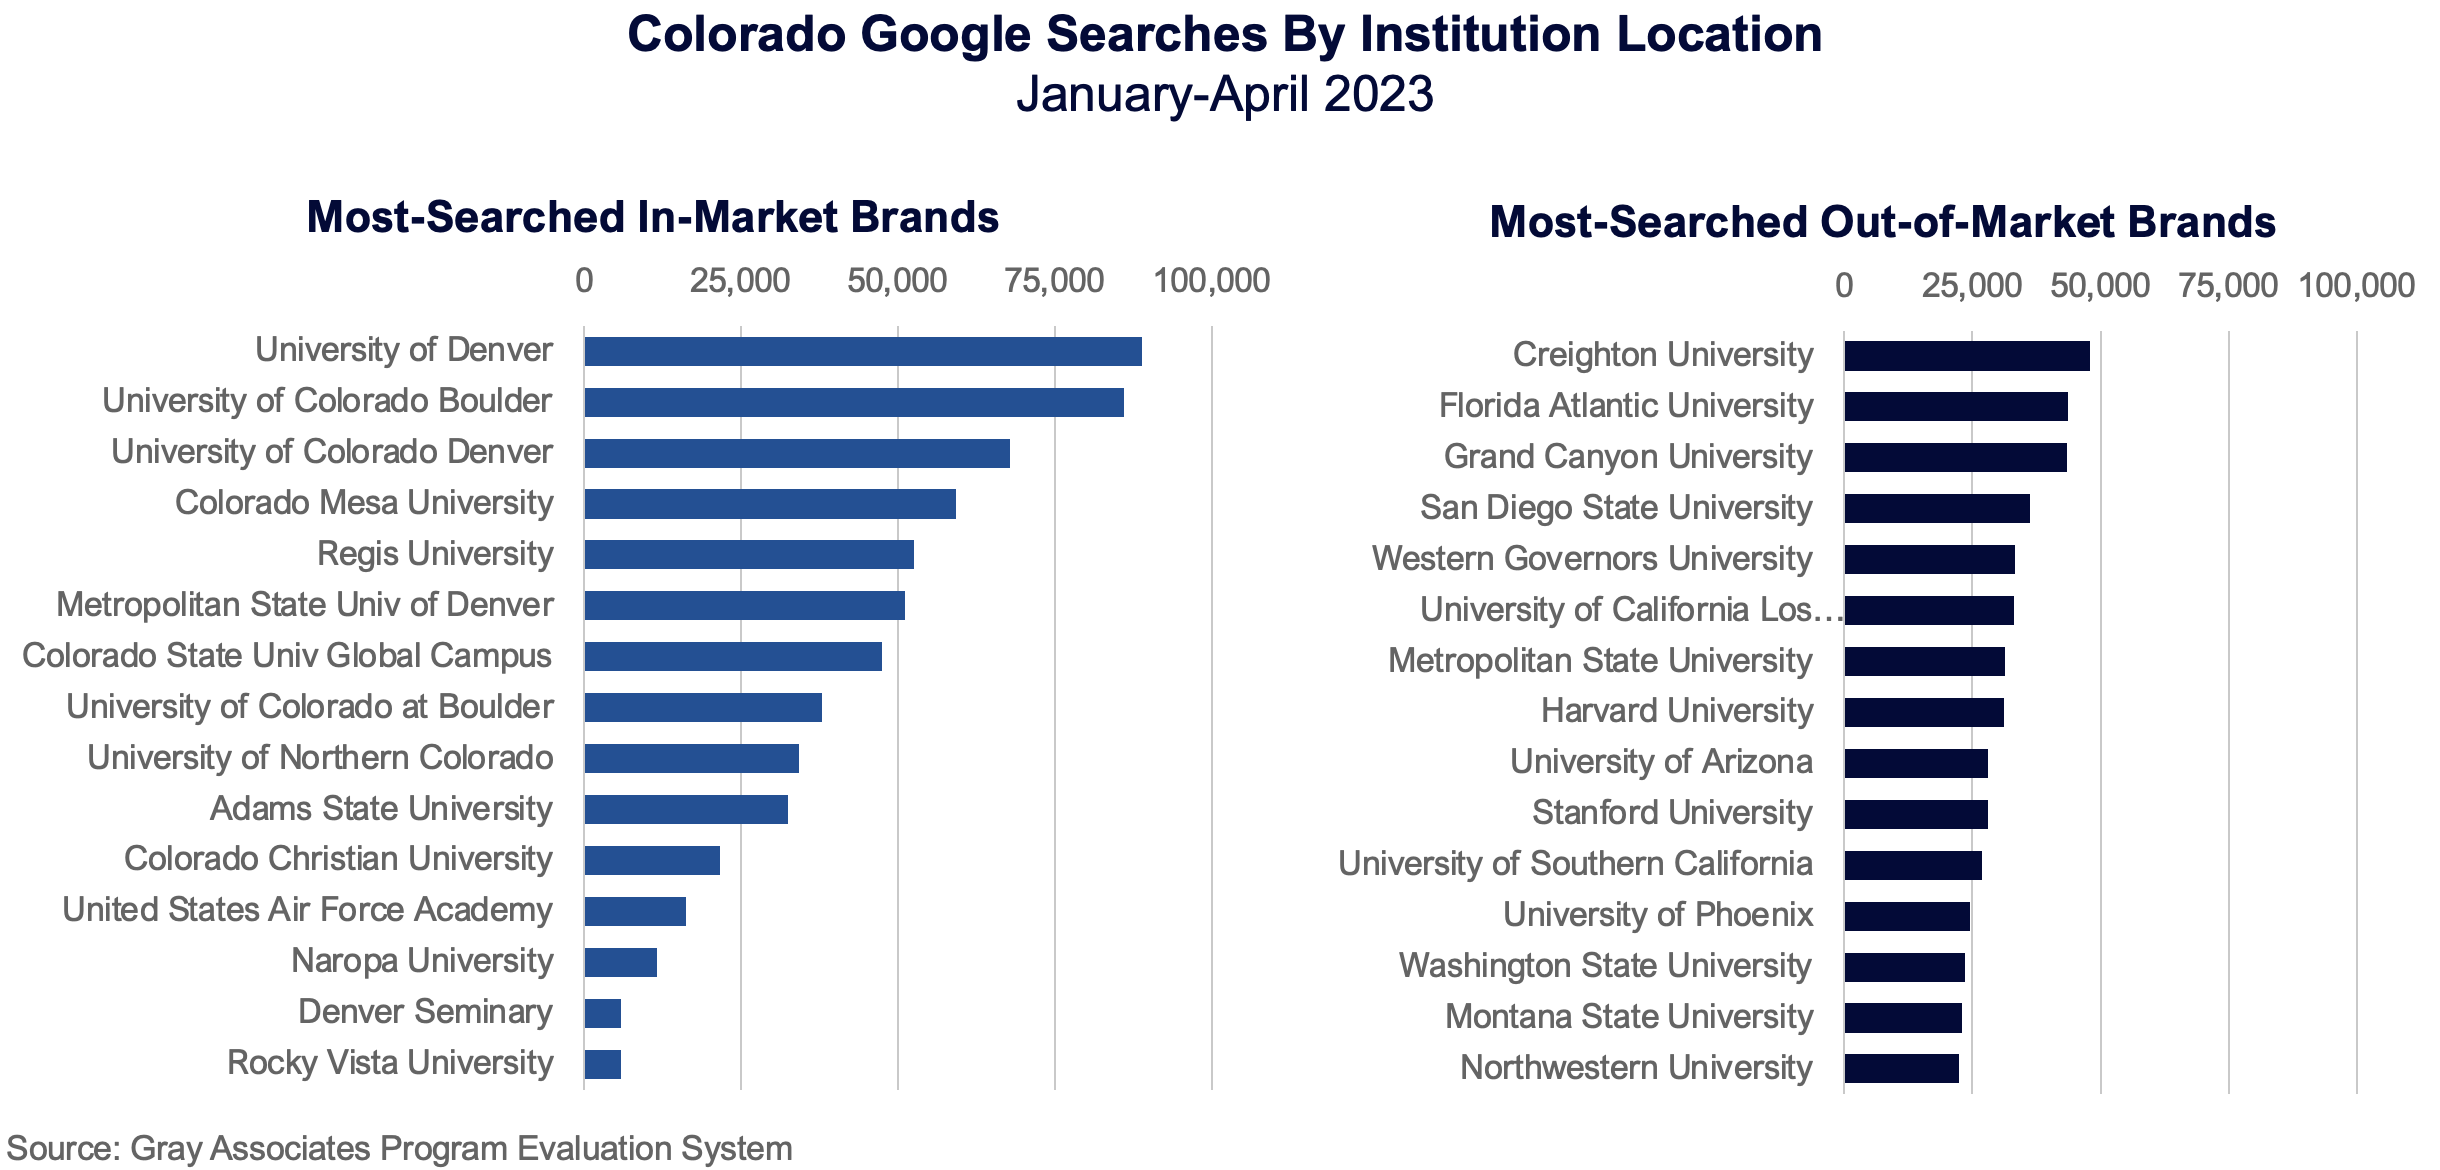 Colorado Google searches by institution location (January - April 2023)